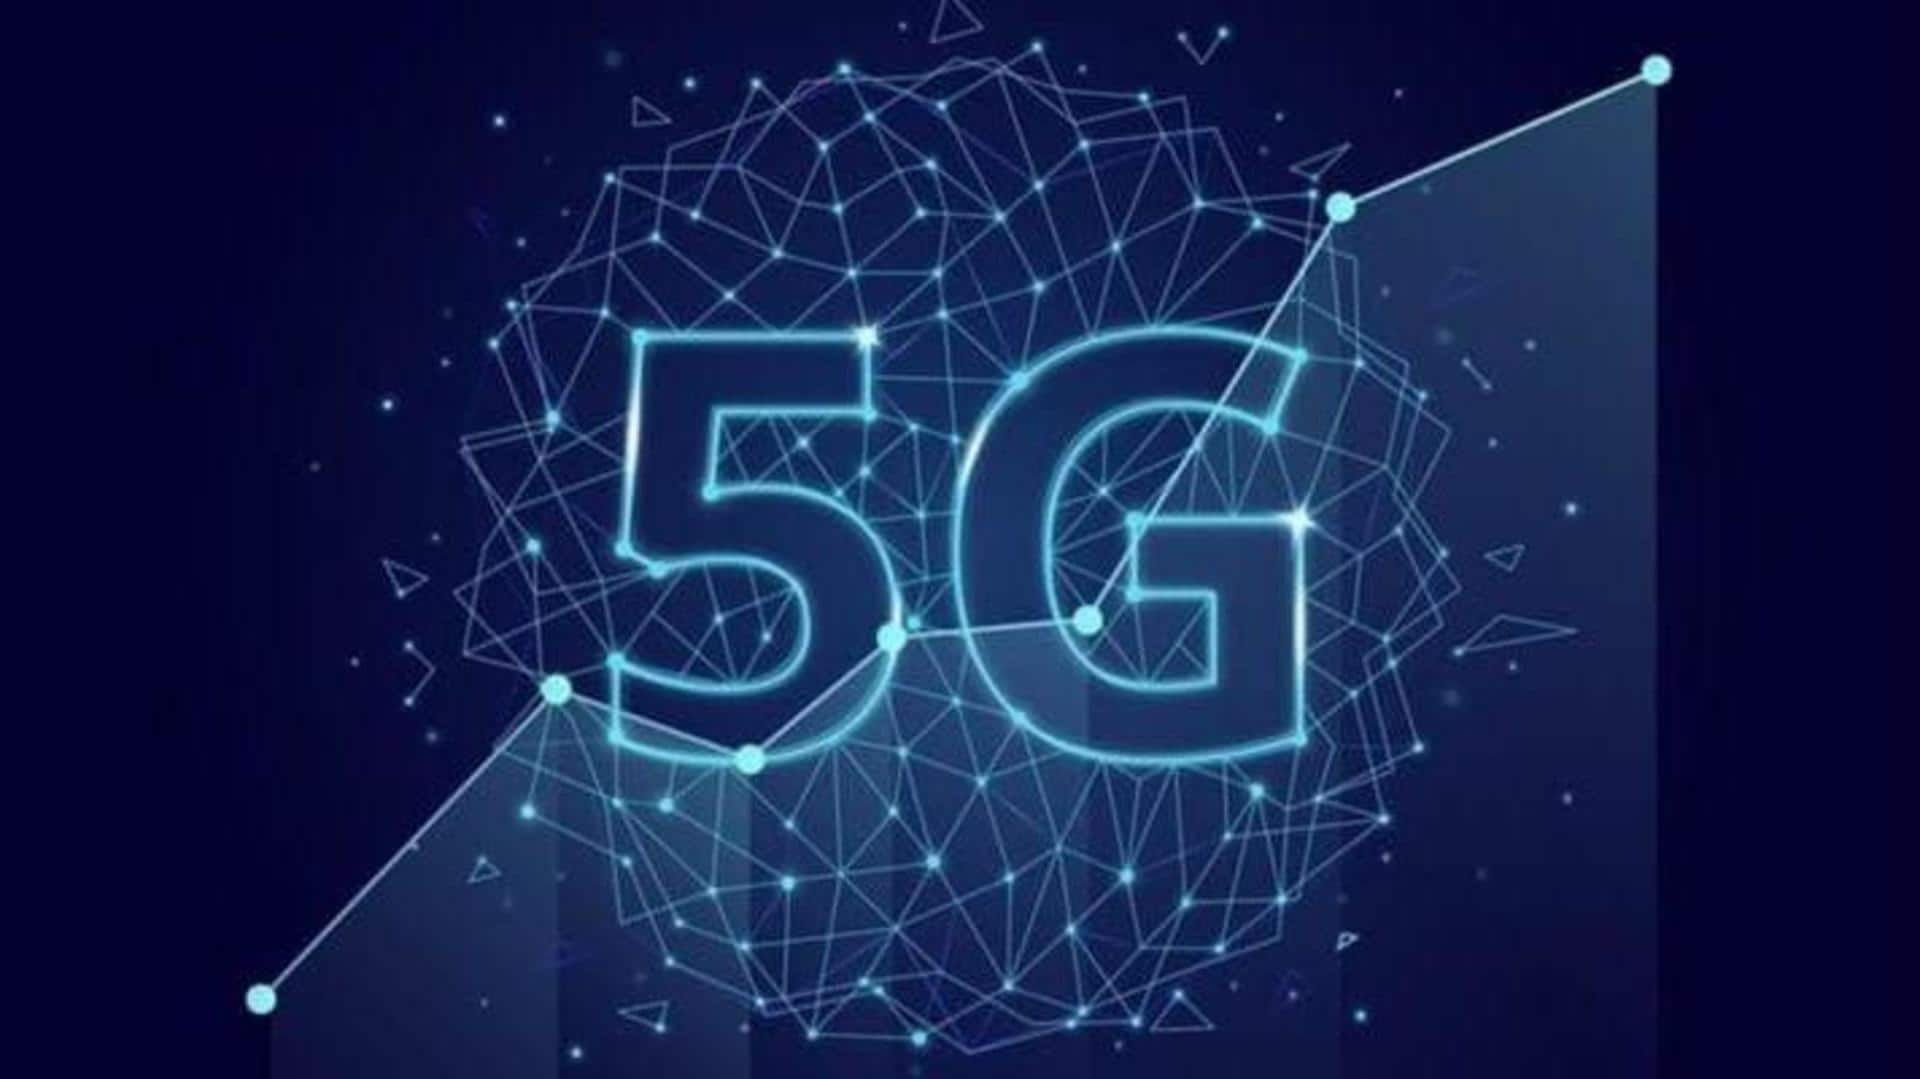 5G smartphone shipments in India to grow by 70%: Report